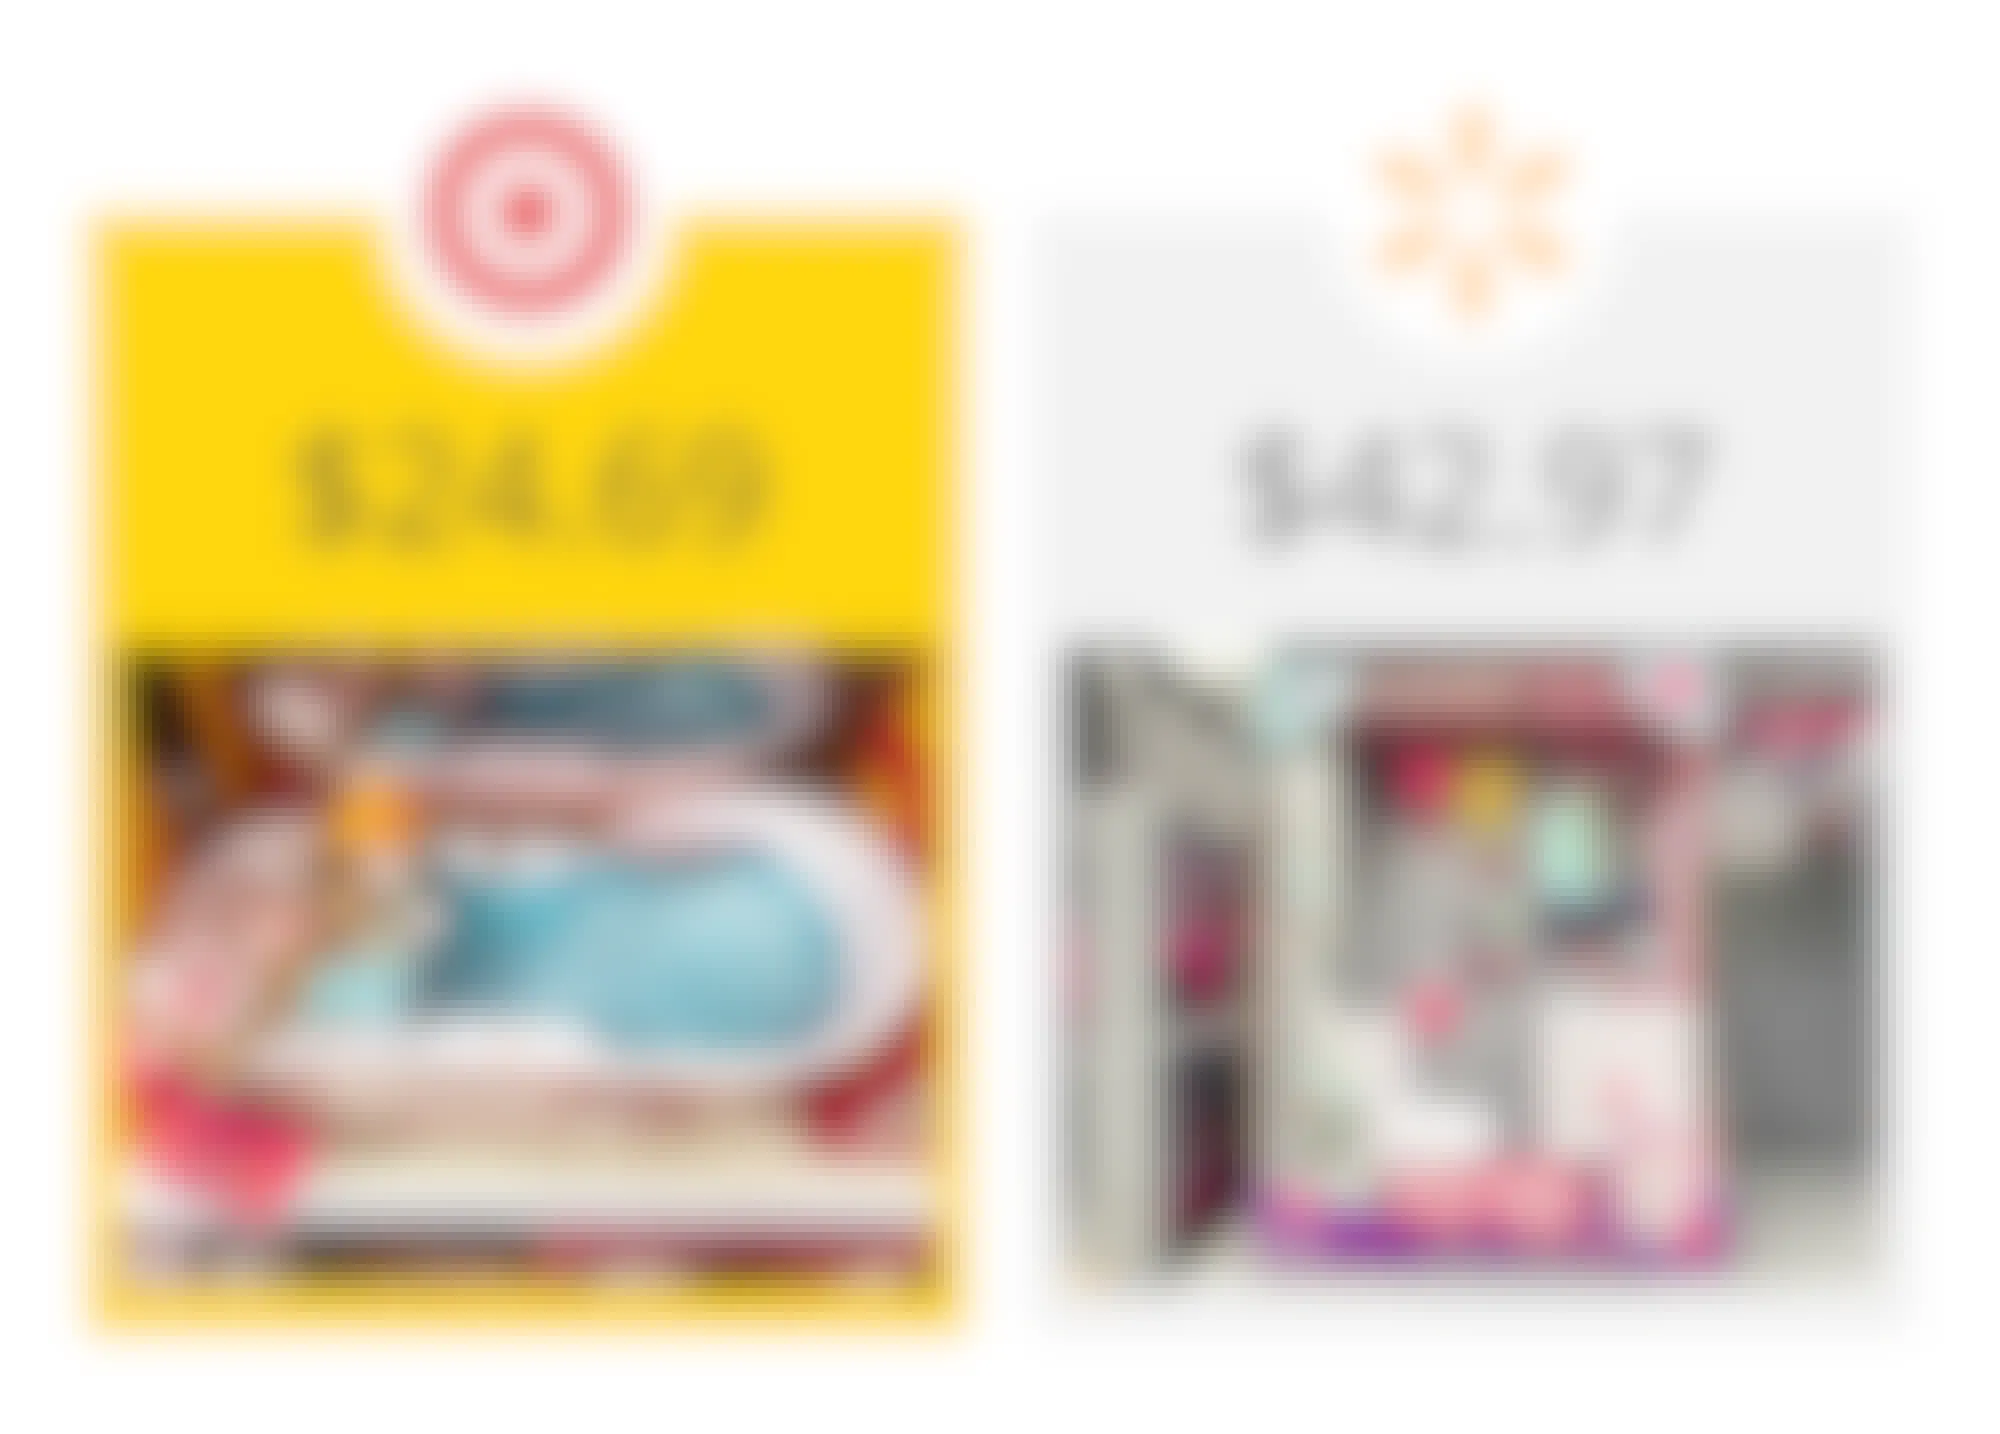 target as the winner on a graphic showing price comparison between target's our generation and walmart's my life as doll bathroom sets